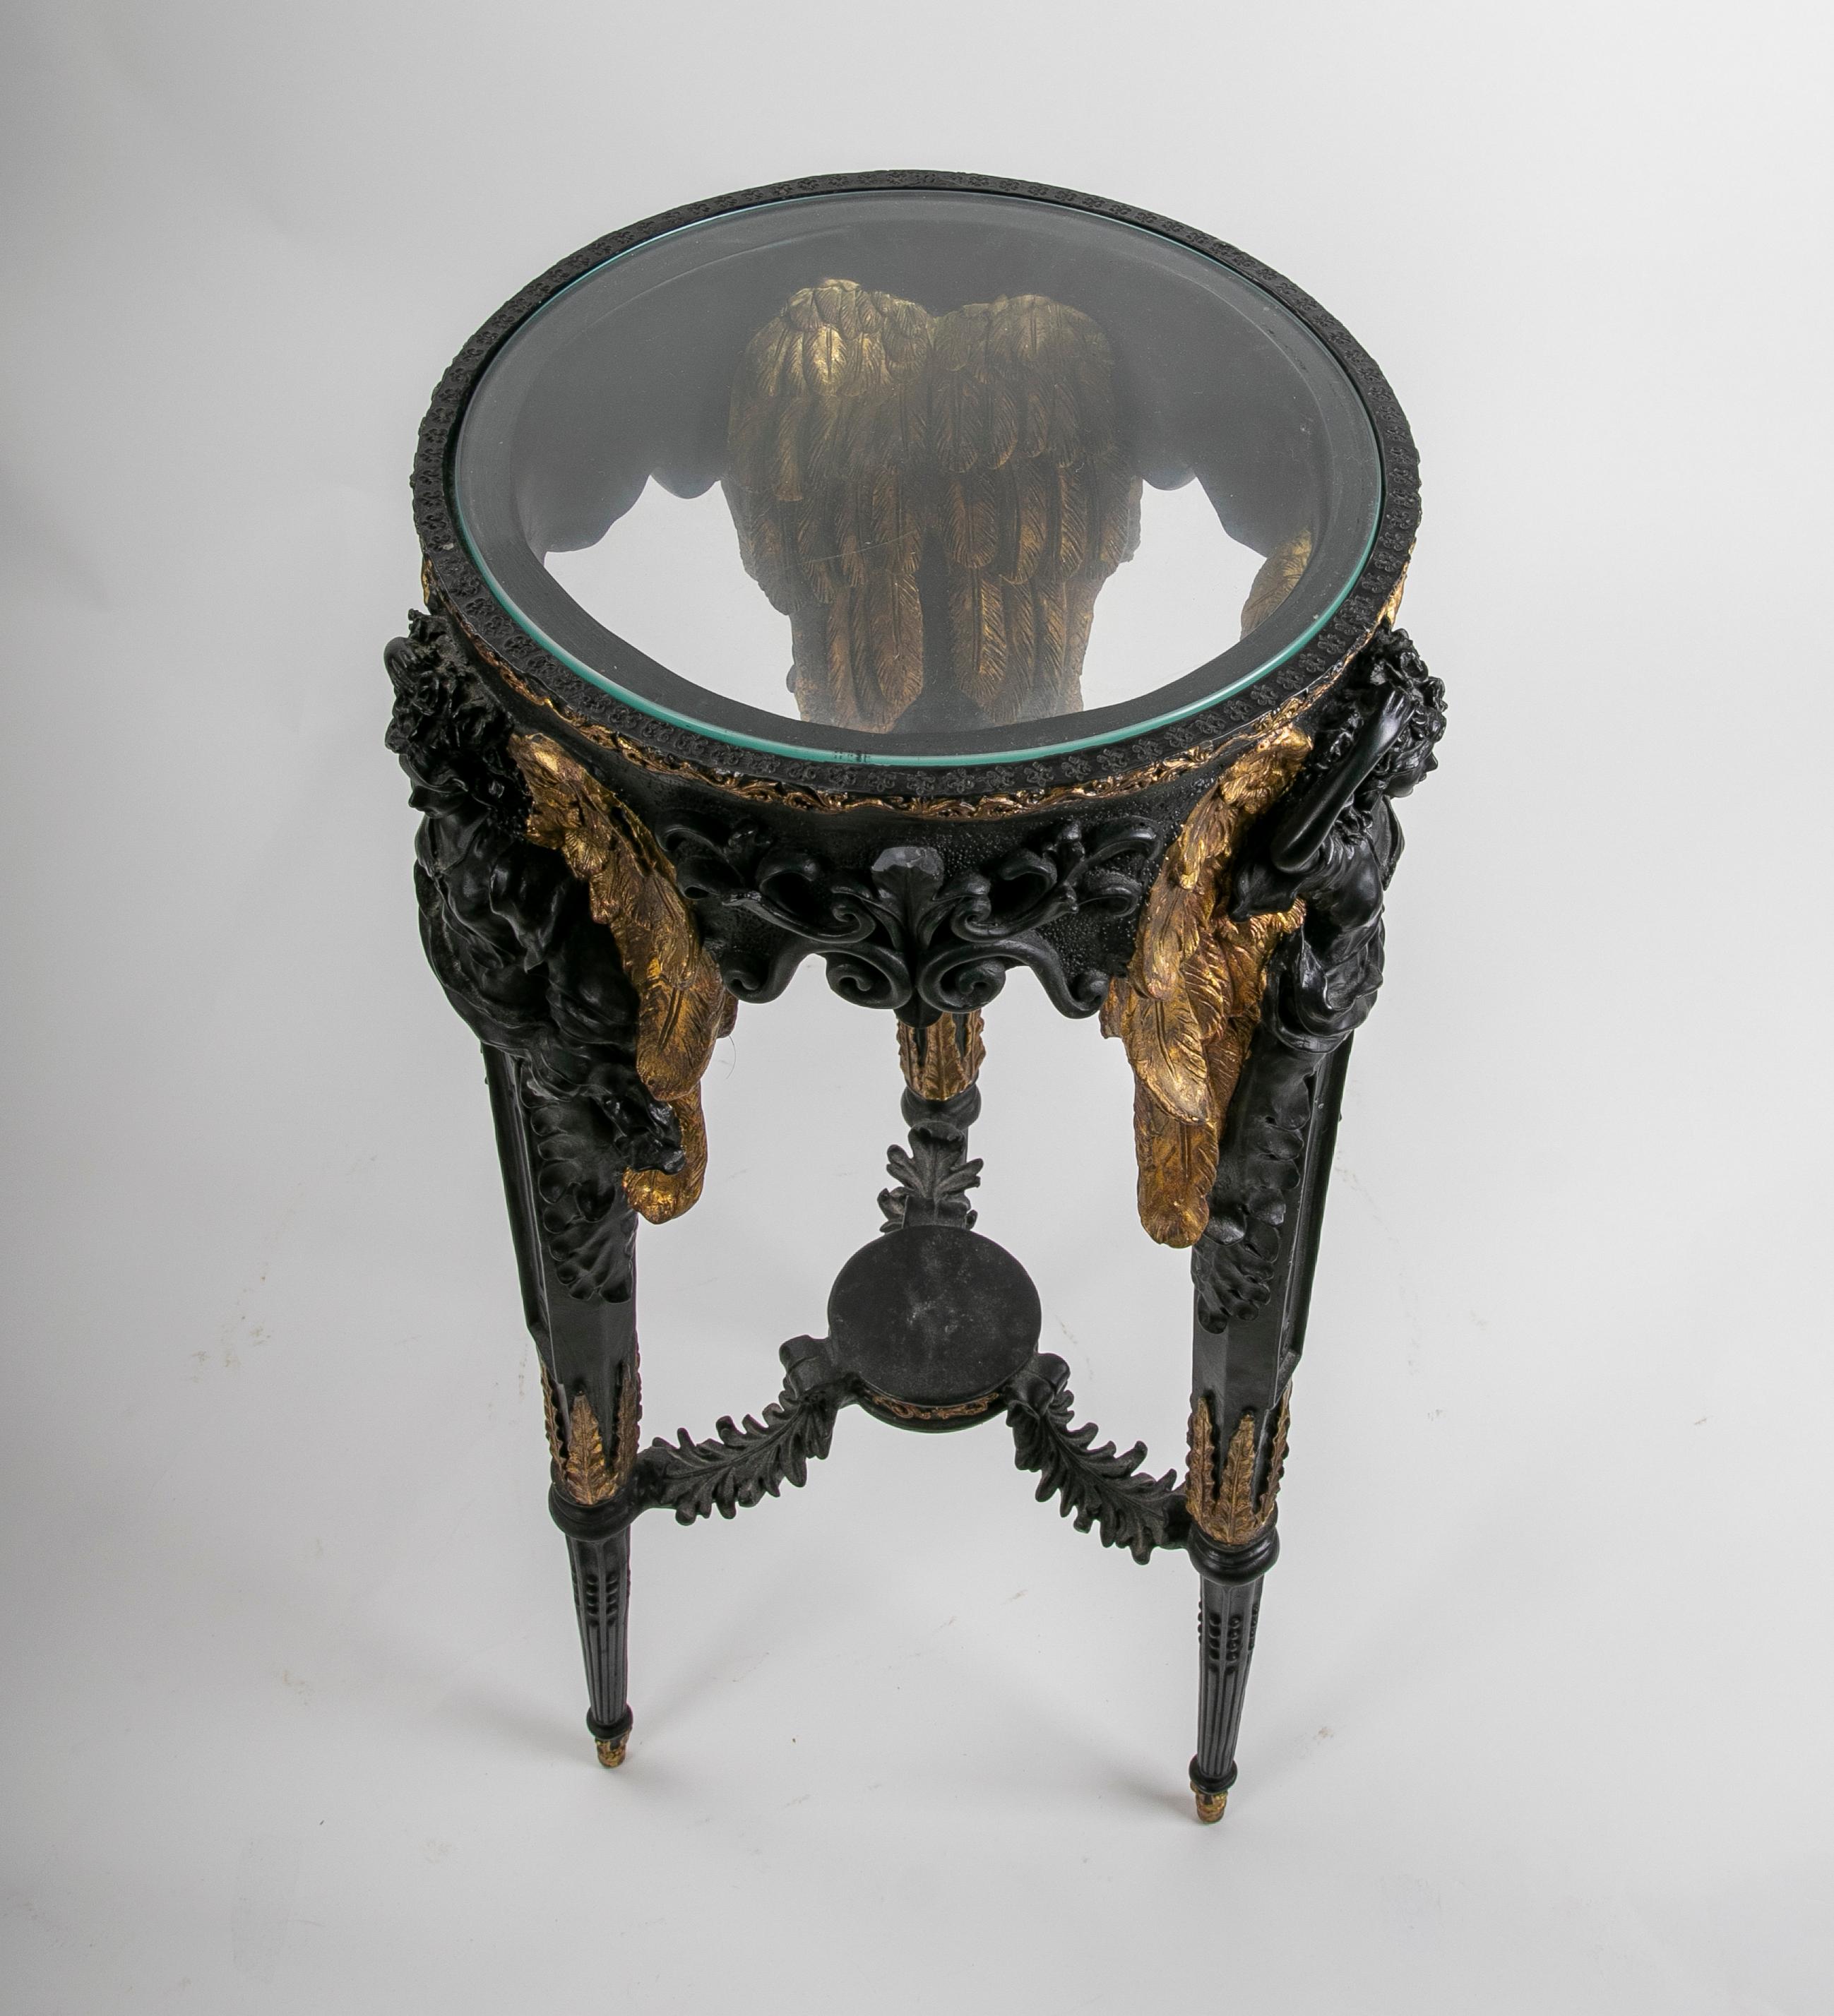 Polychromed Bronze Side Table with Winged Women on The Legs.